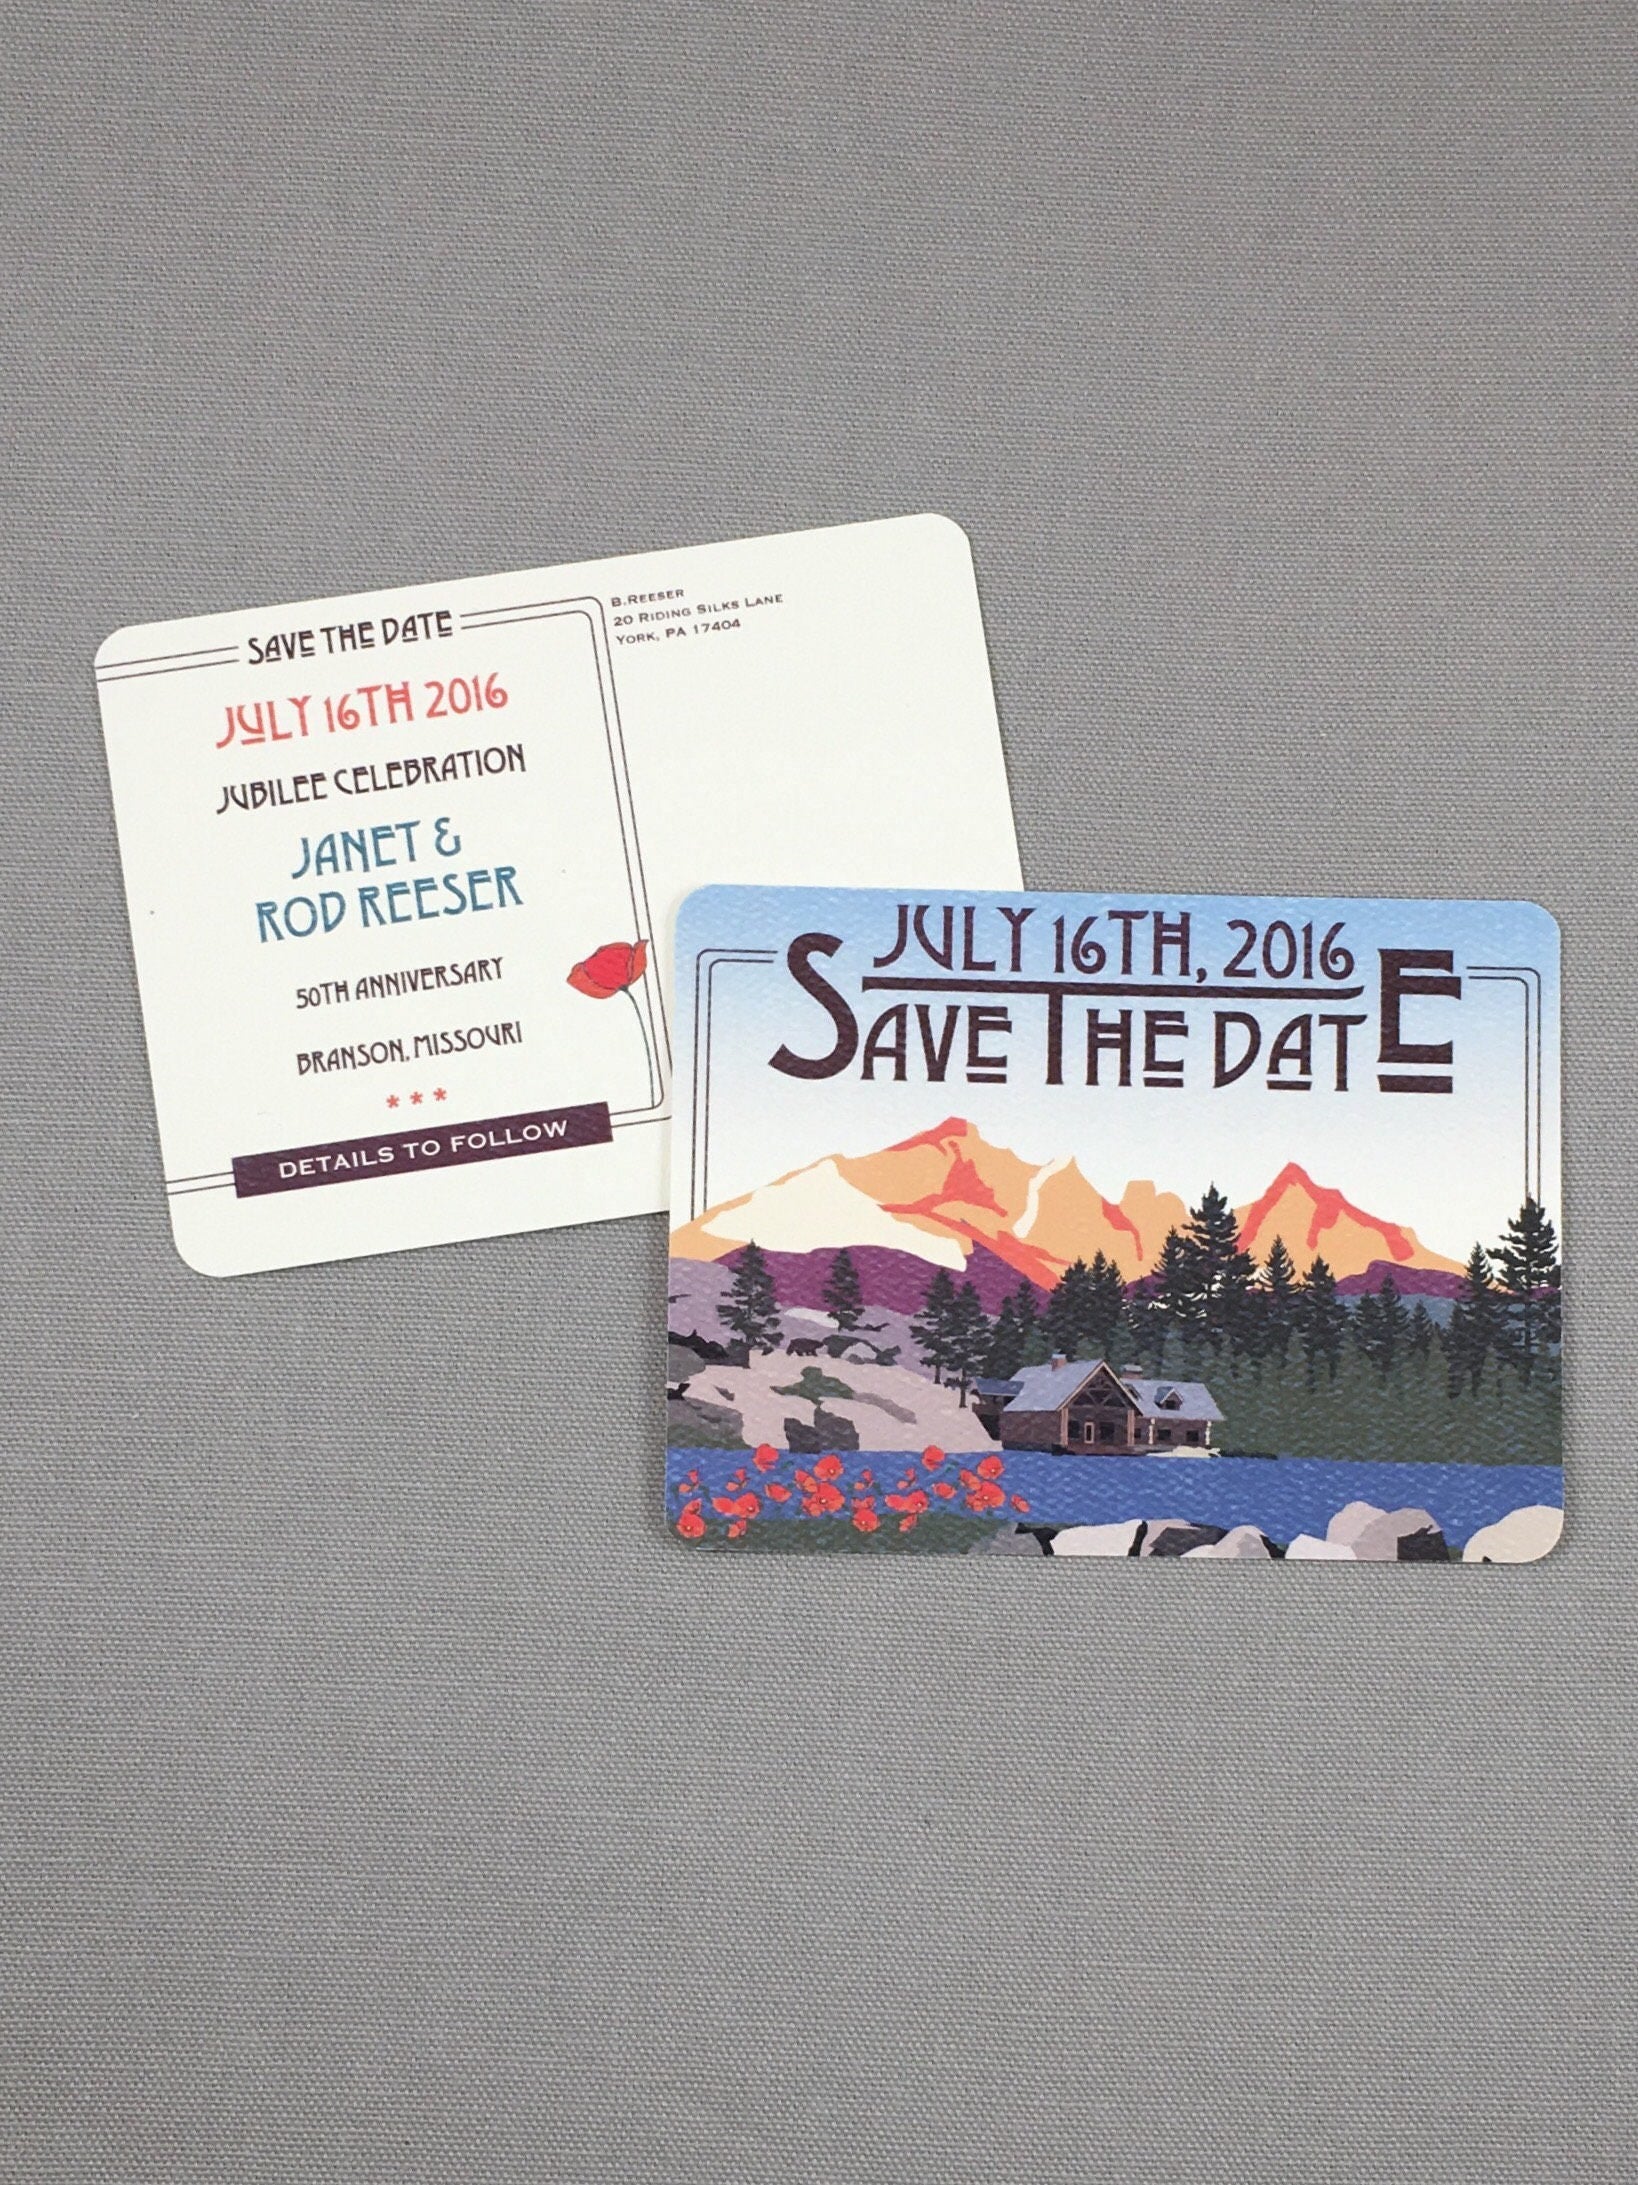 The Hideout Lodge Kirkwood California Save the Date Postcards